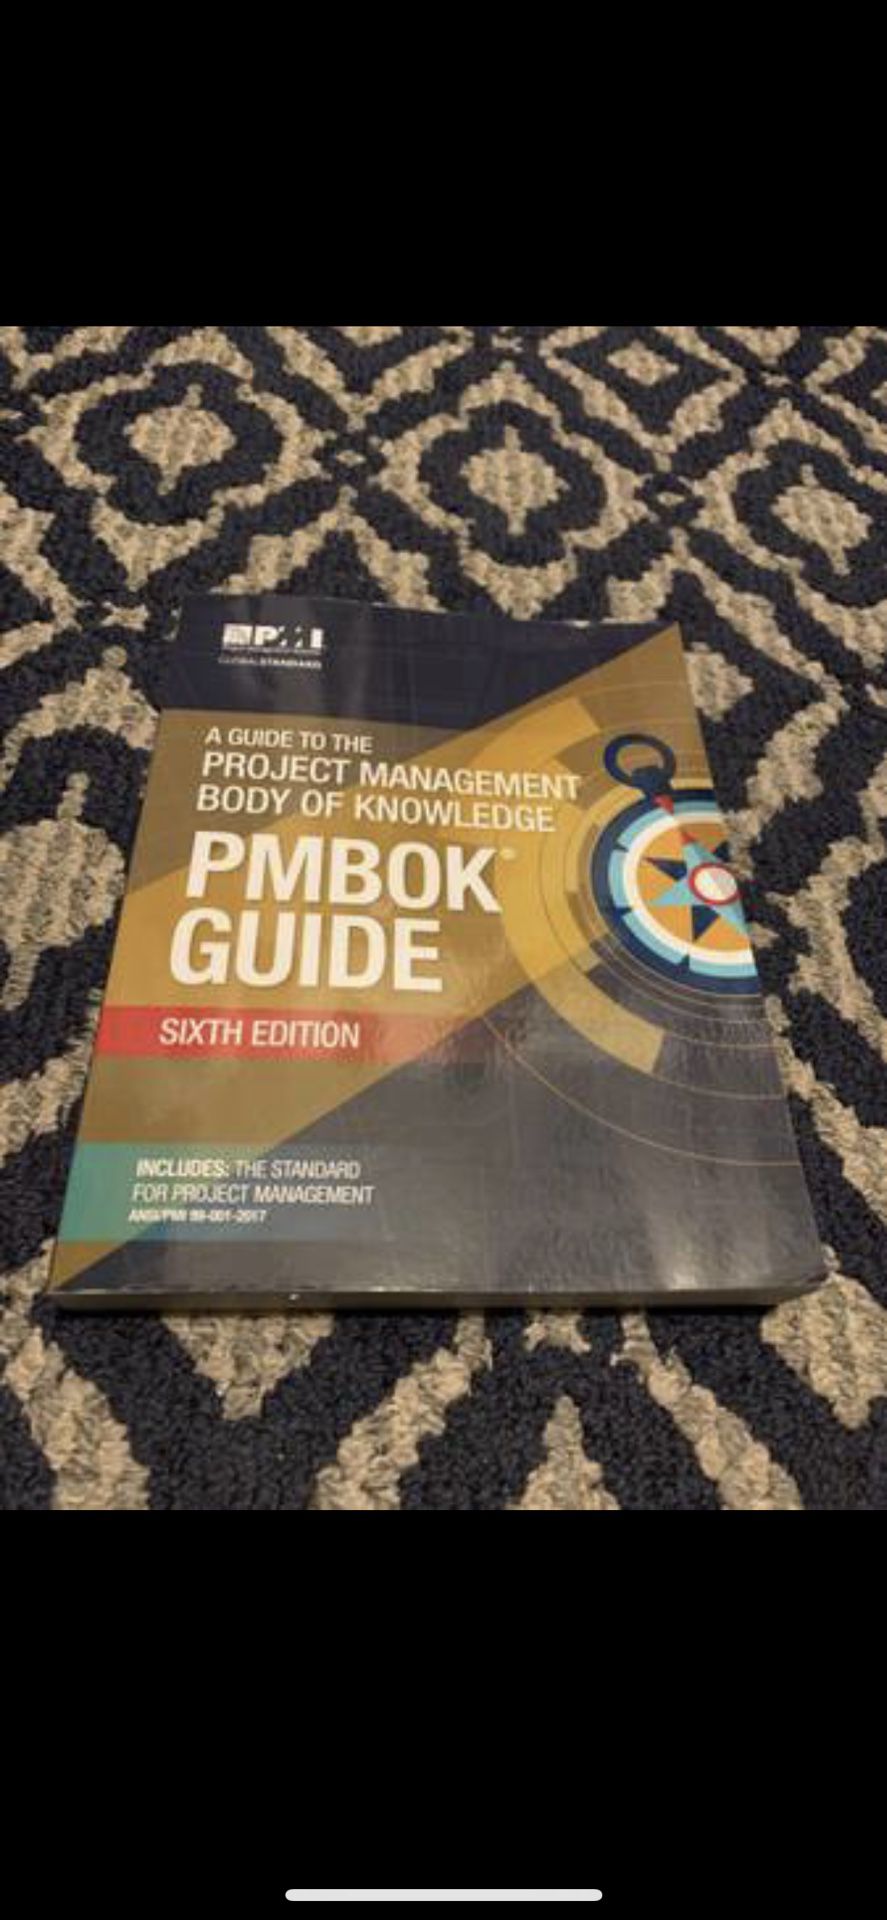 PMBOK PMP Exam Guide, 6th Edition (Latest) - Like New